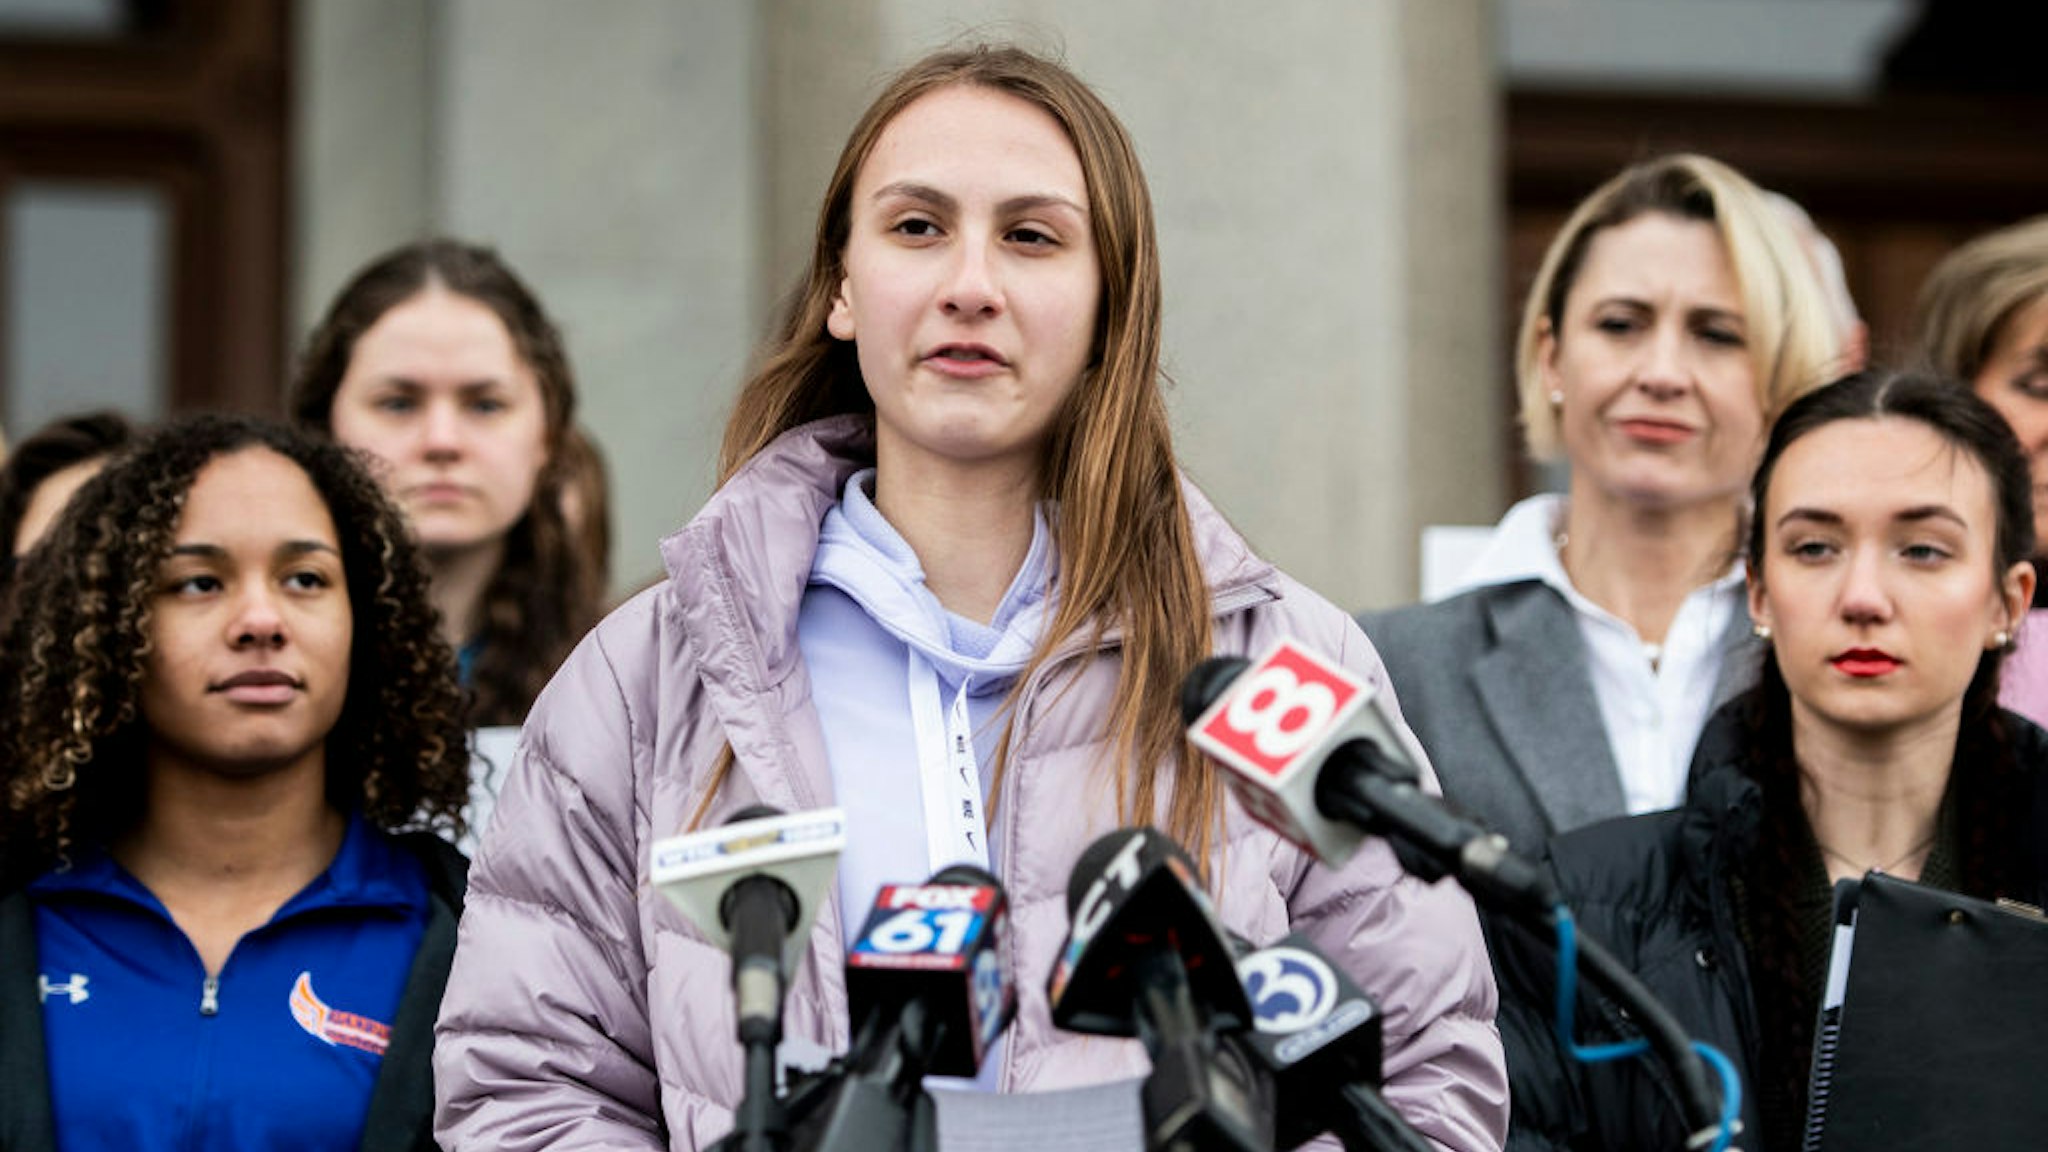 Canton High School senior Chelsea Mitchell speaks during a press conference with Alanna Smith, Danbury High School sophomore, to her left and Selina Soule, Glastonbury High School senior, to her right at the Connecticut State Capitol Wednesday, Feb. 12, 2020, in downtown Hartford, Conn.